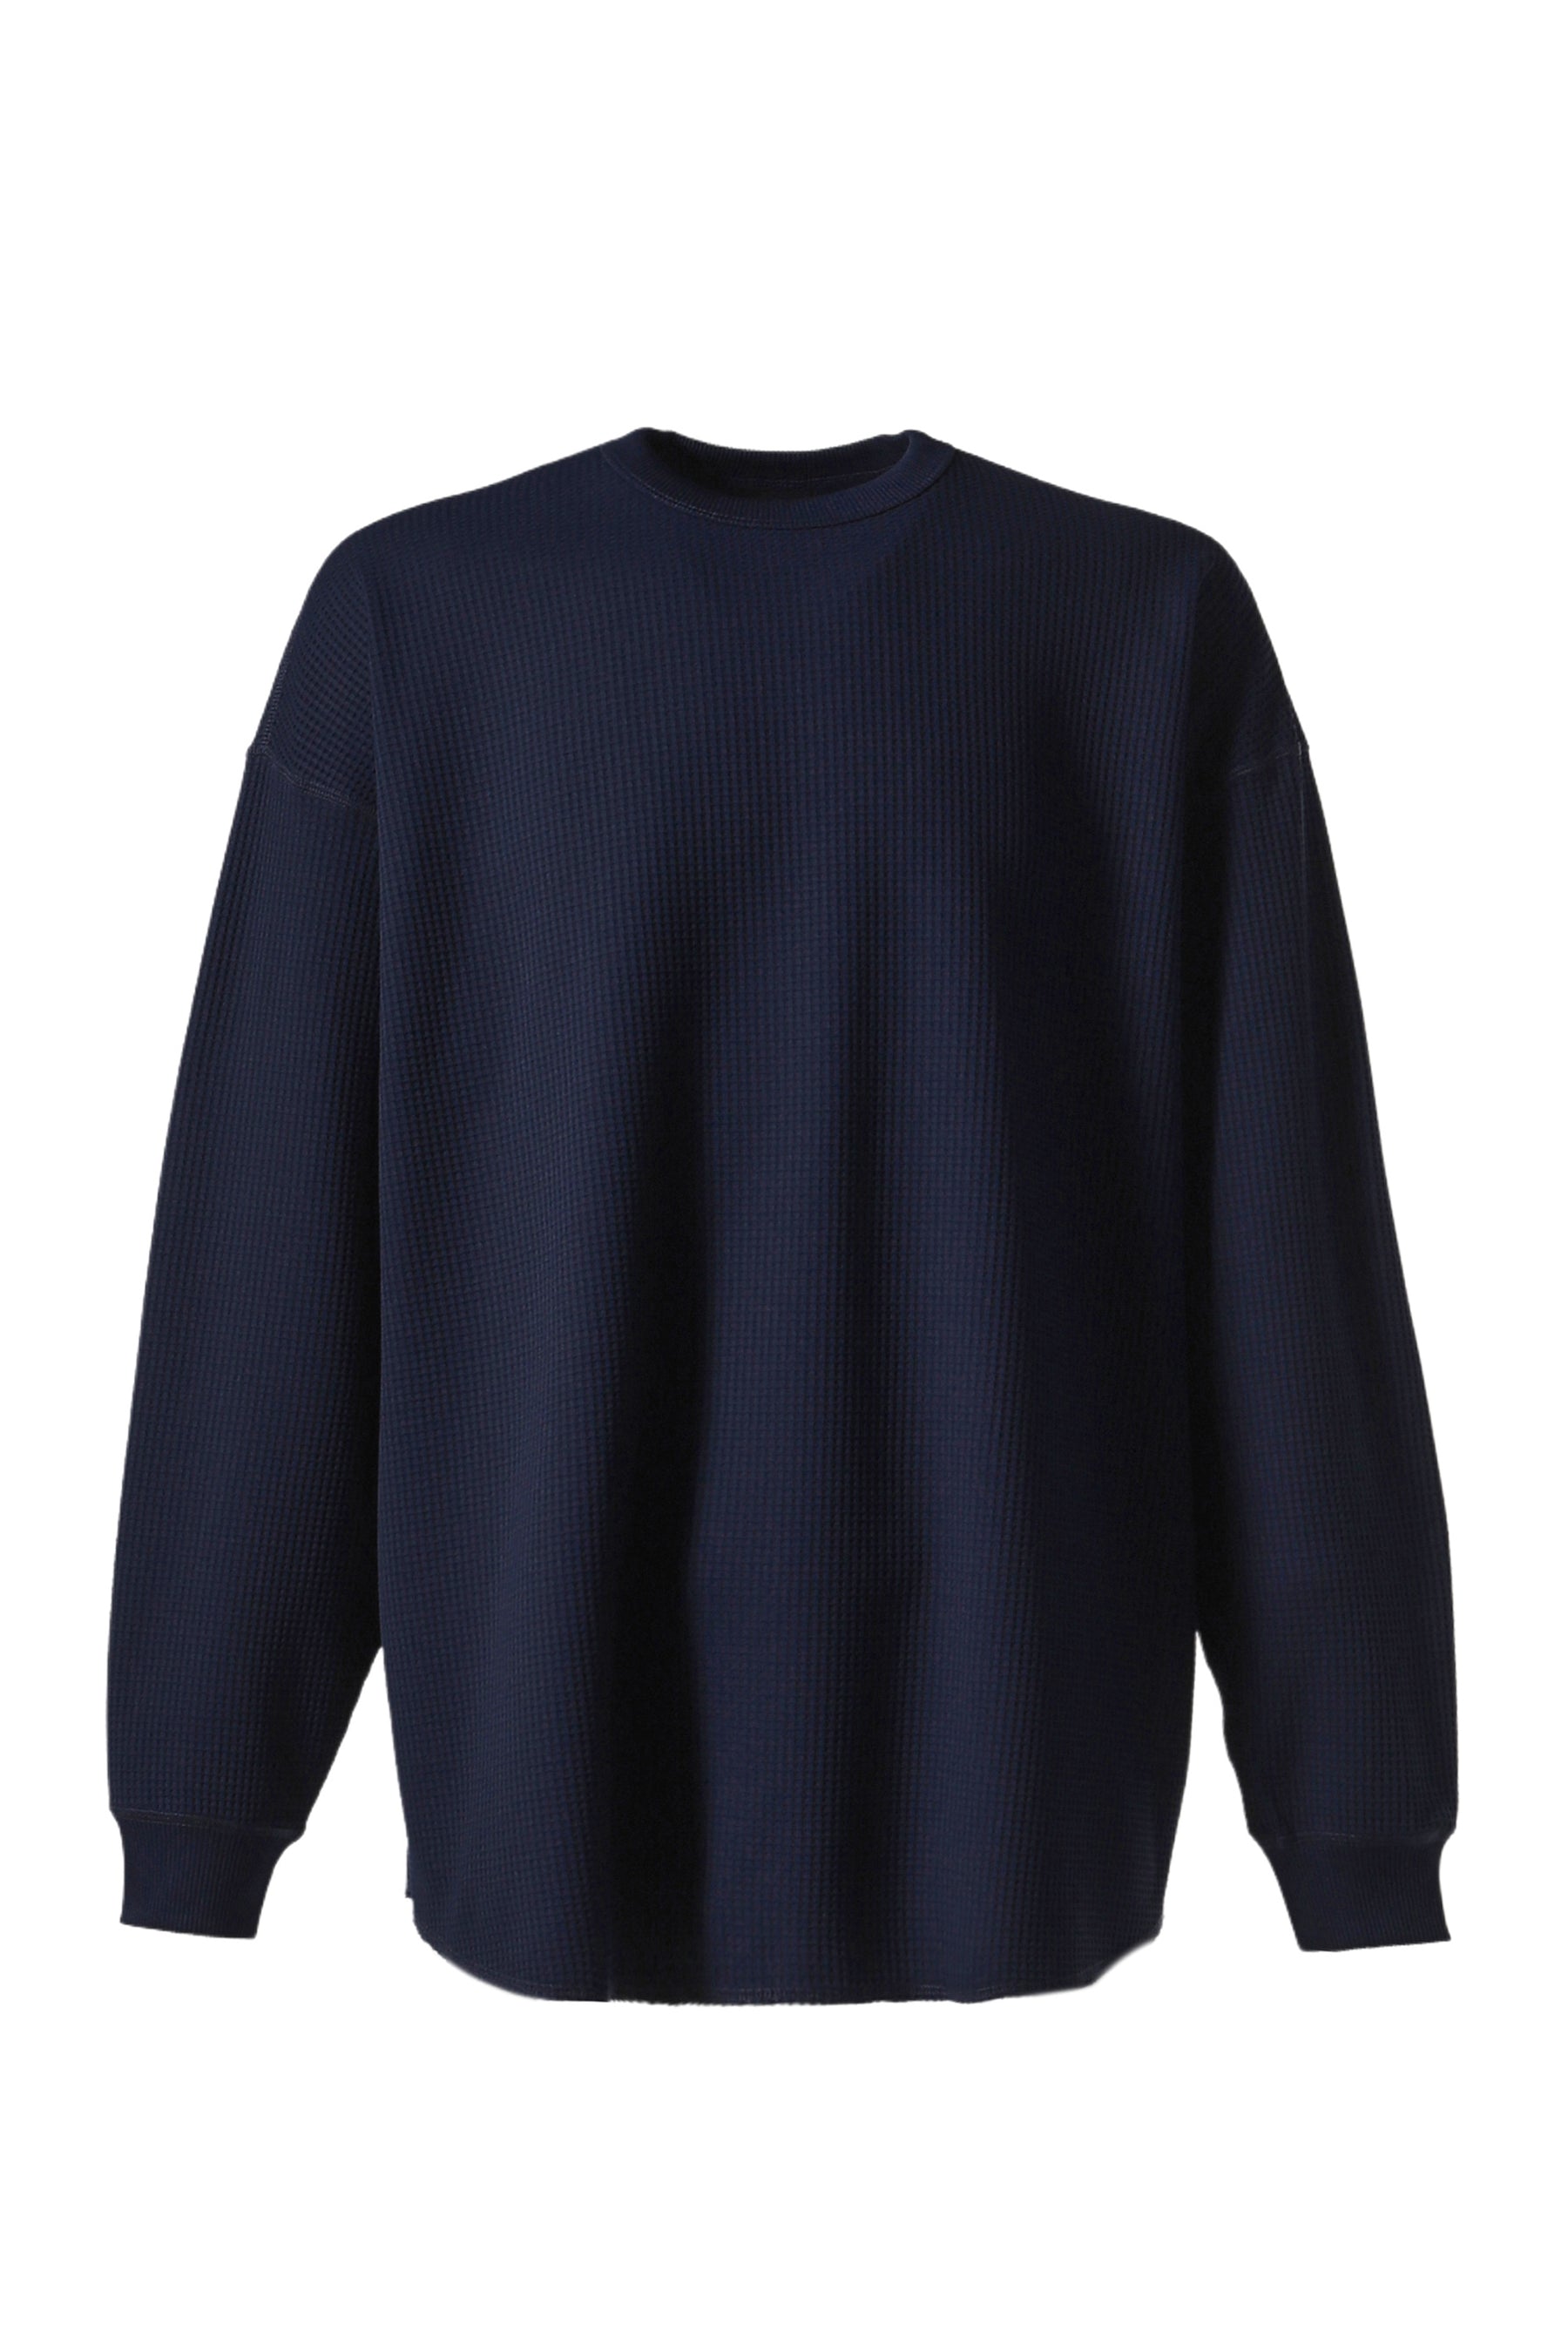 TECH THERMAL CREW L/S / NVY